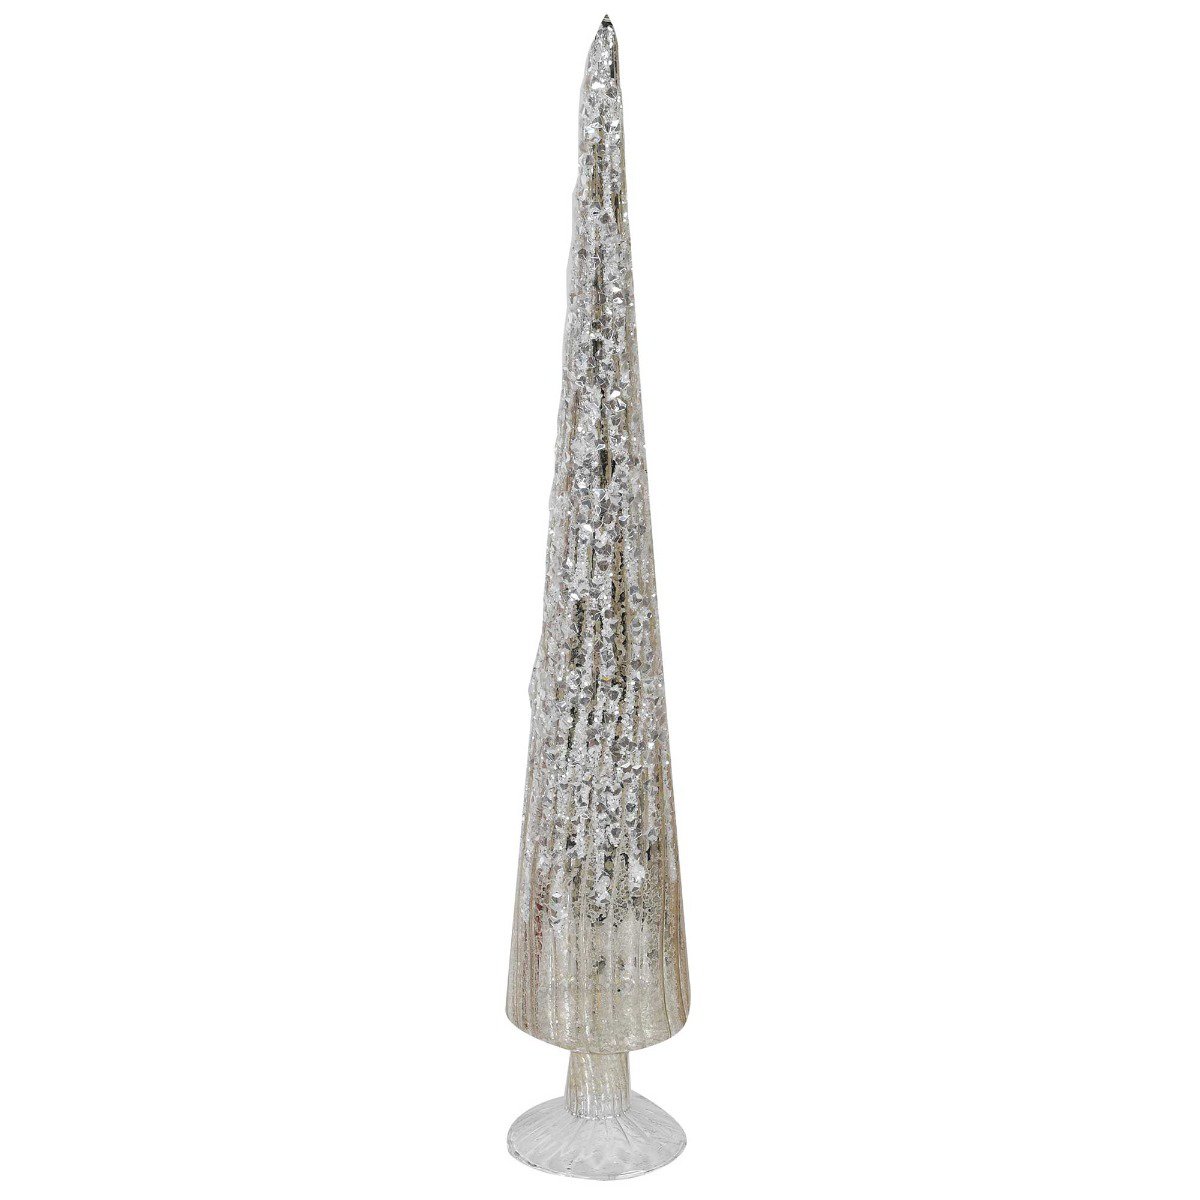 Crackled Silver Glass Christmas Tree